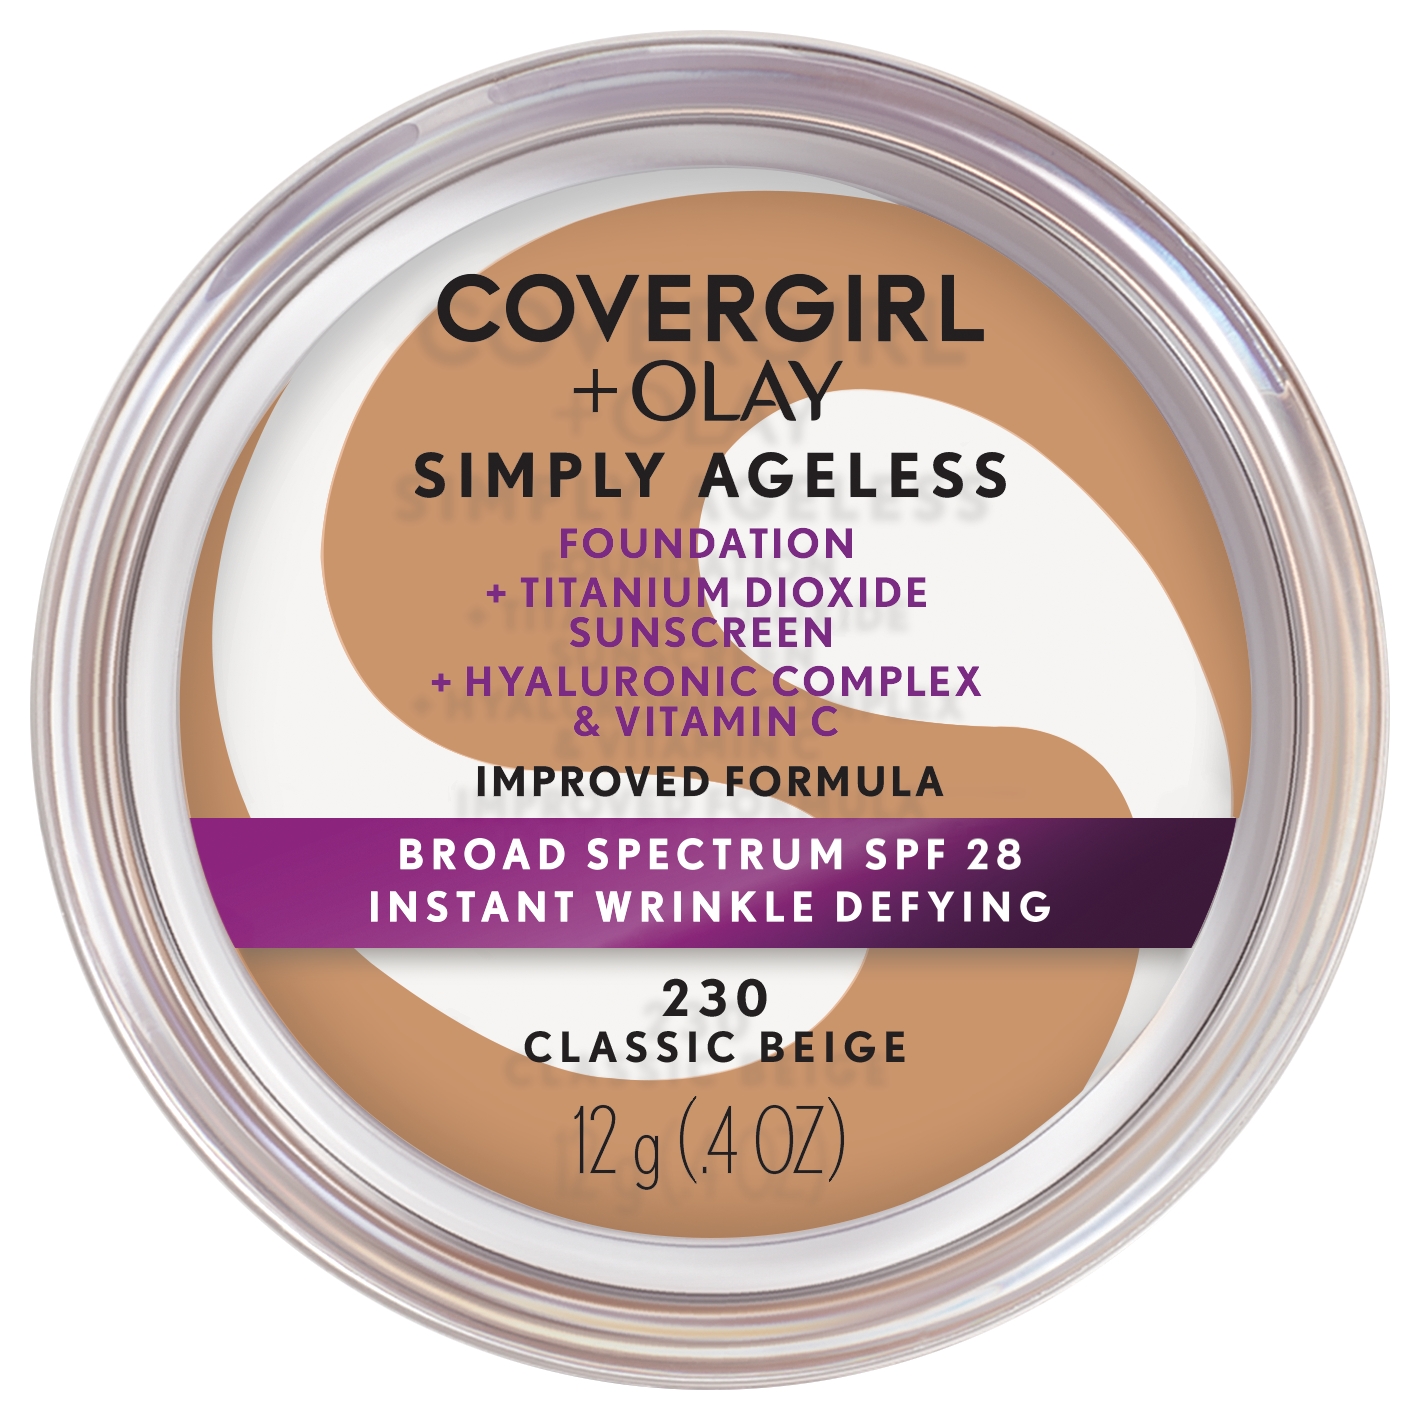 COVERGIRL + OLAY Simply Ageless Instant Wrinkle-Defying Foundation with SPF 28, Classic Beige, 0.44 oz - image 1 of 9